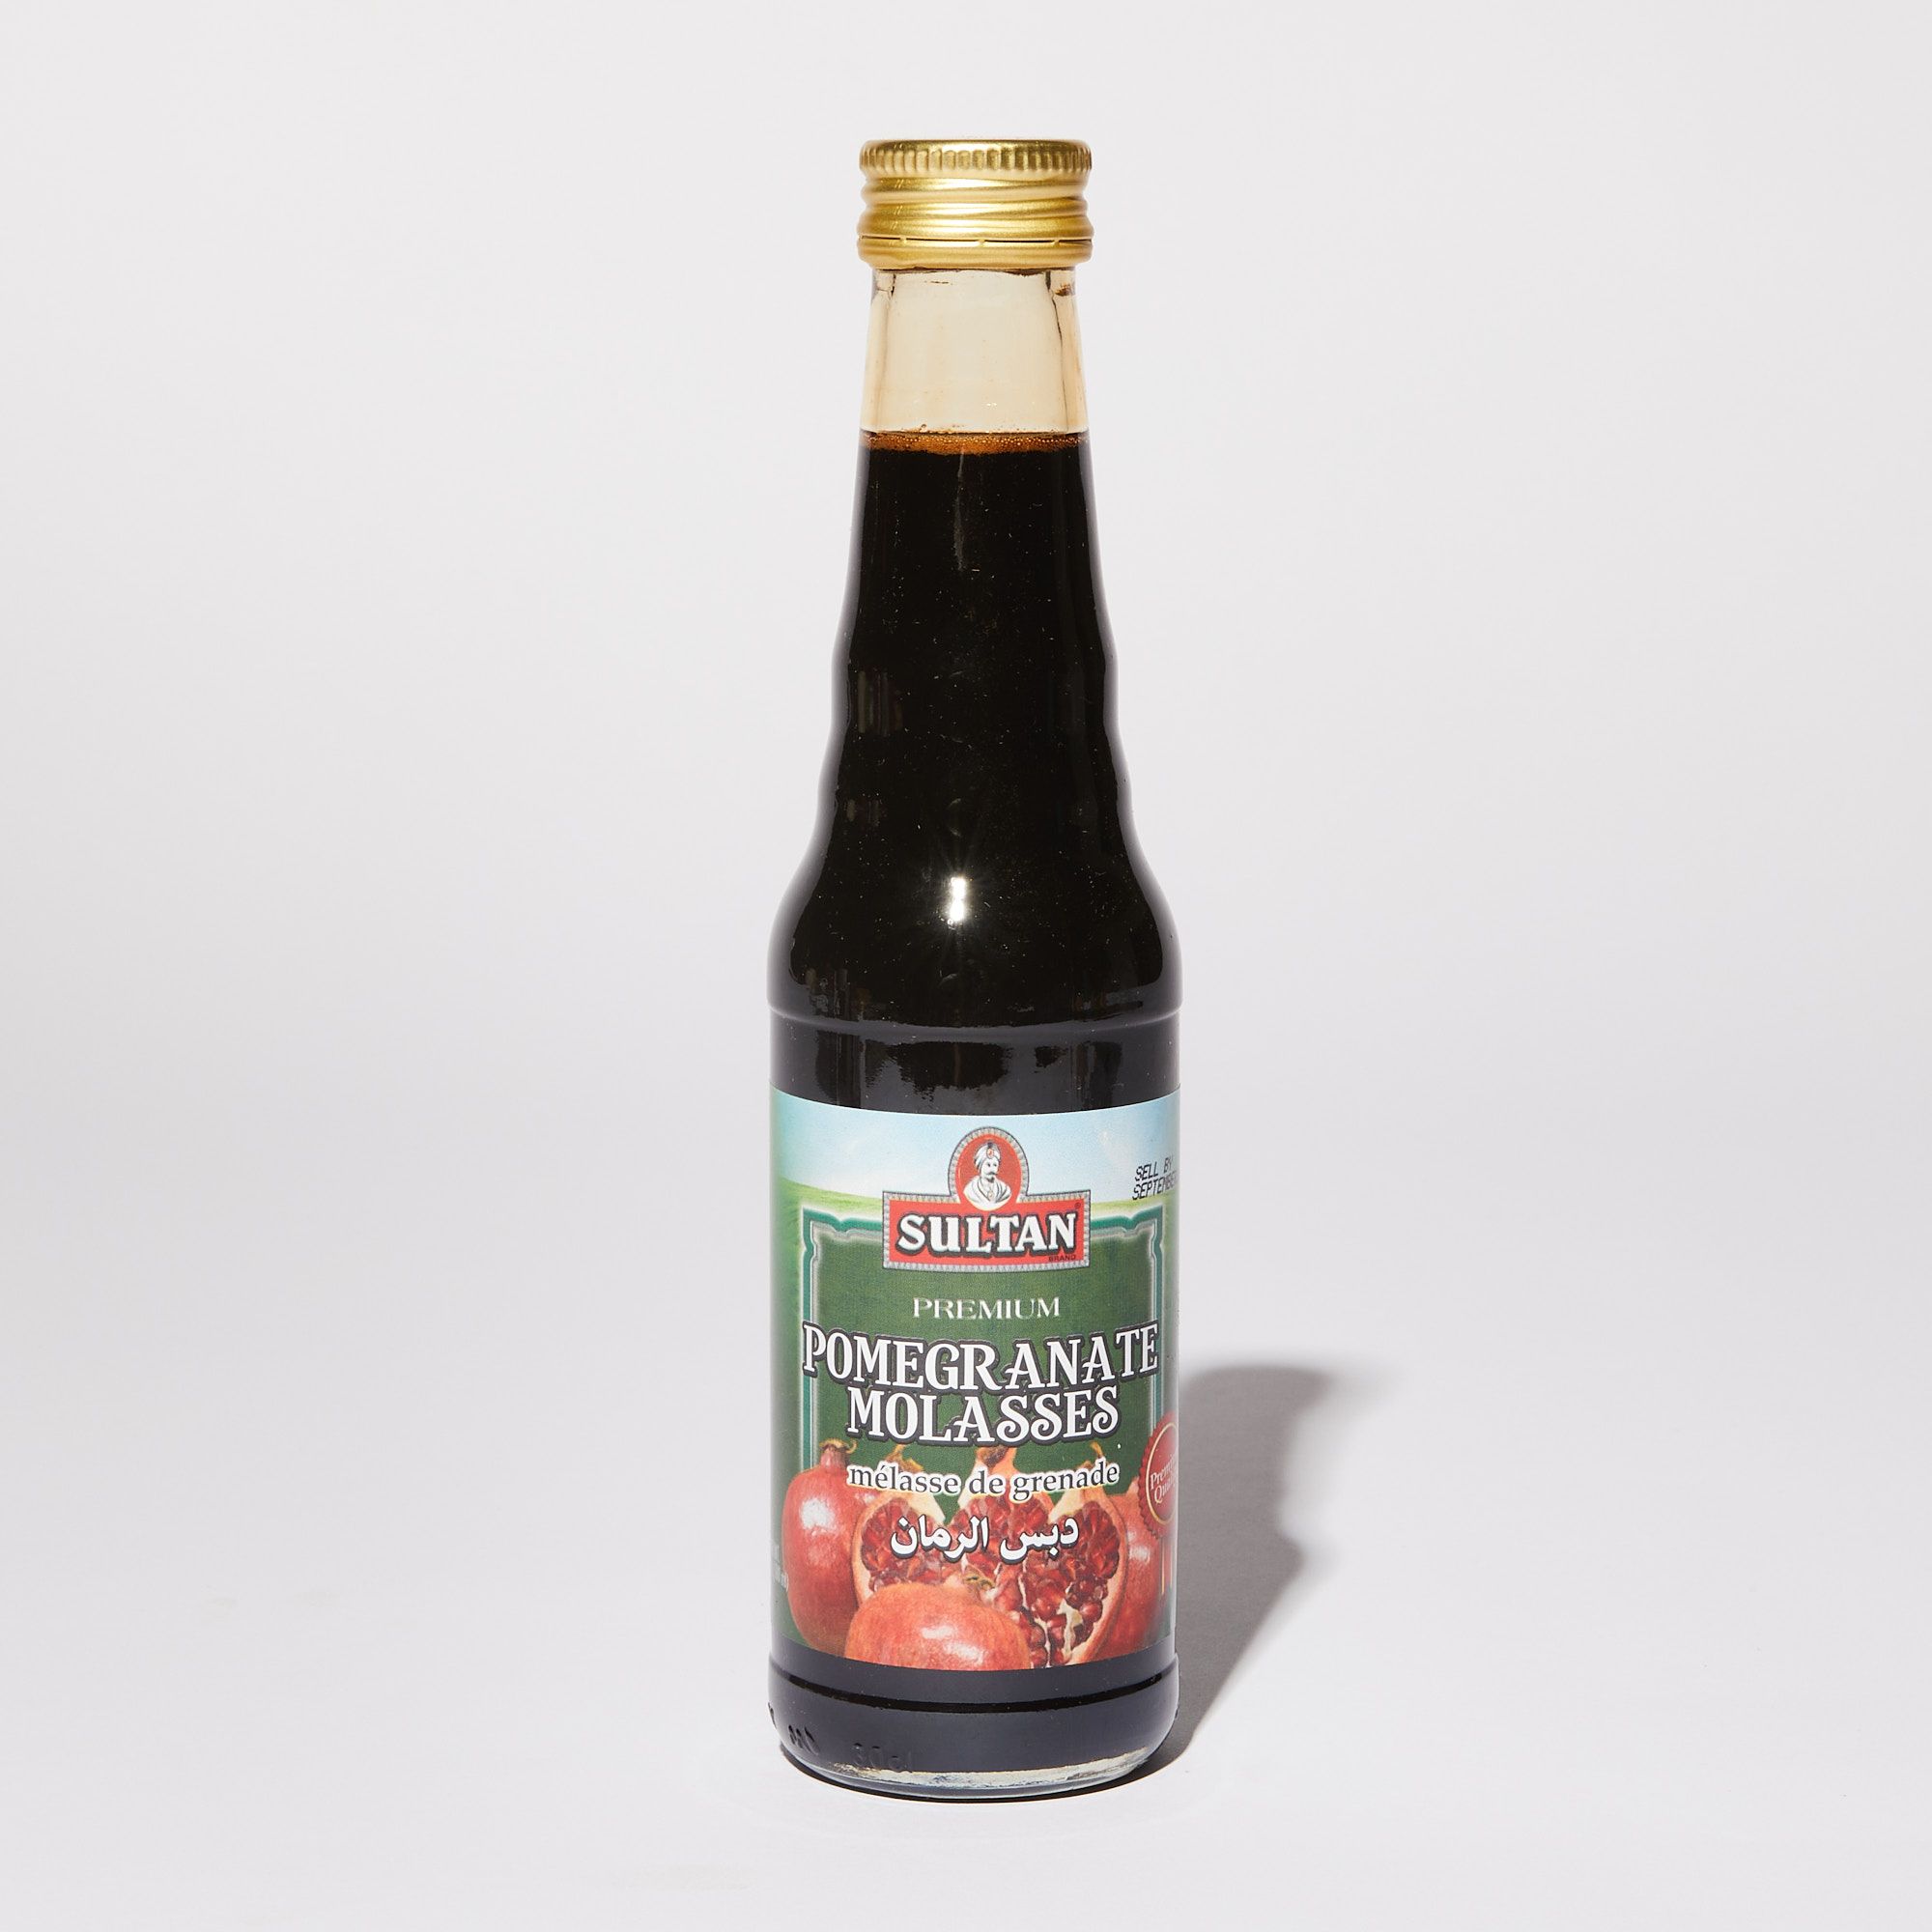 Clear bottle with dark syrup featured a label with a photo of pomegranates